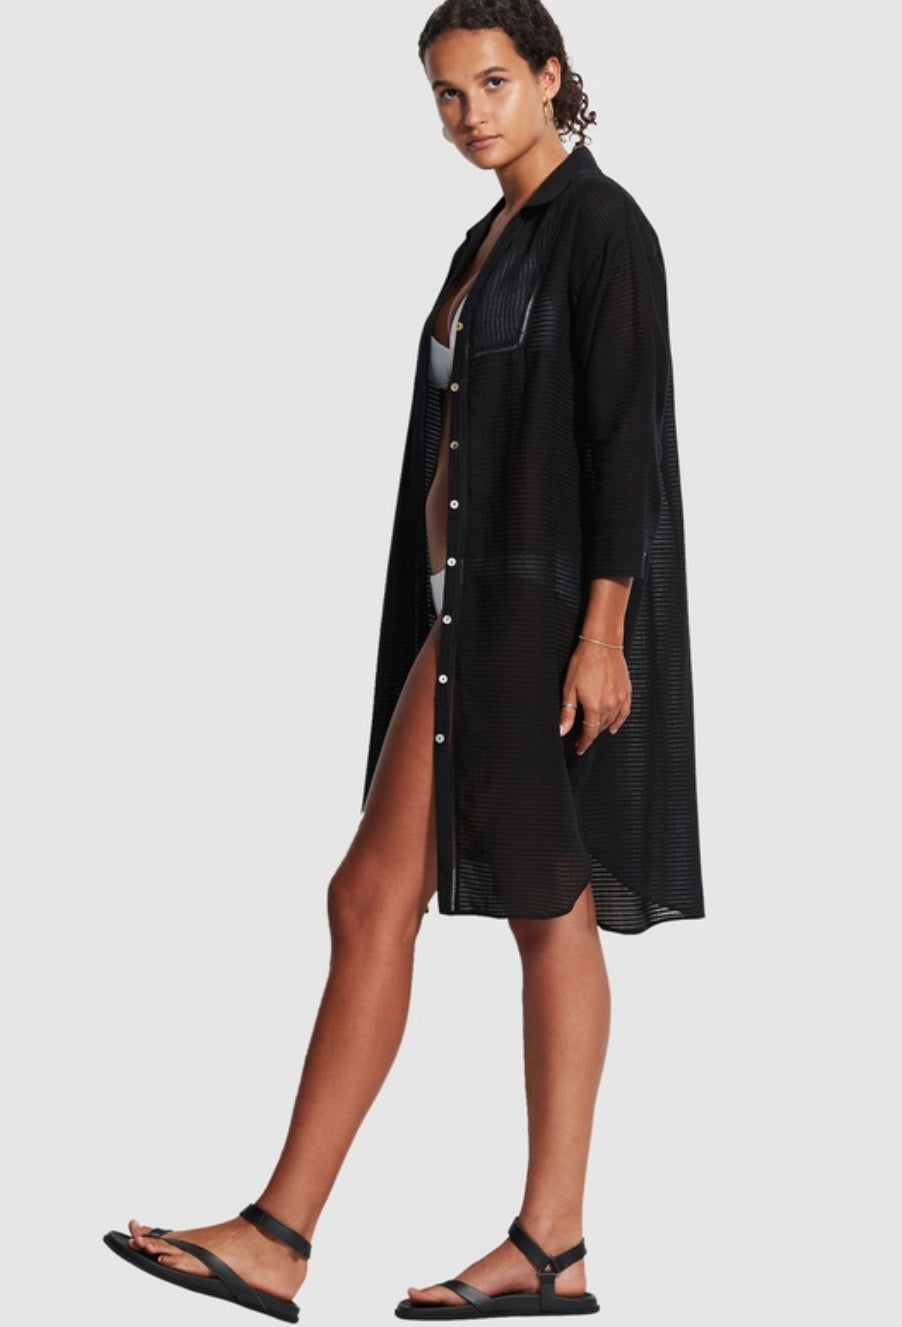 Seafolly Longshore Cover Up Black